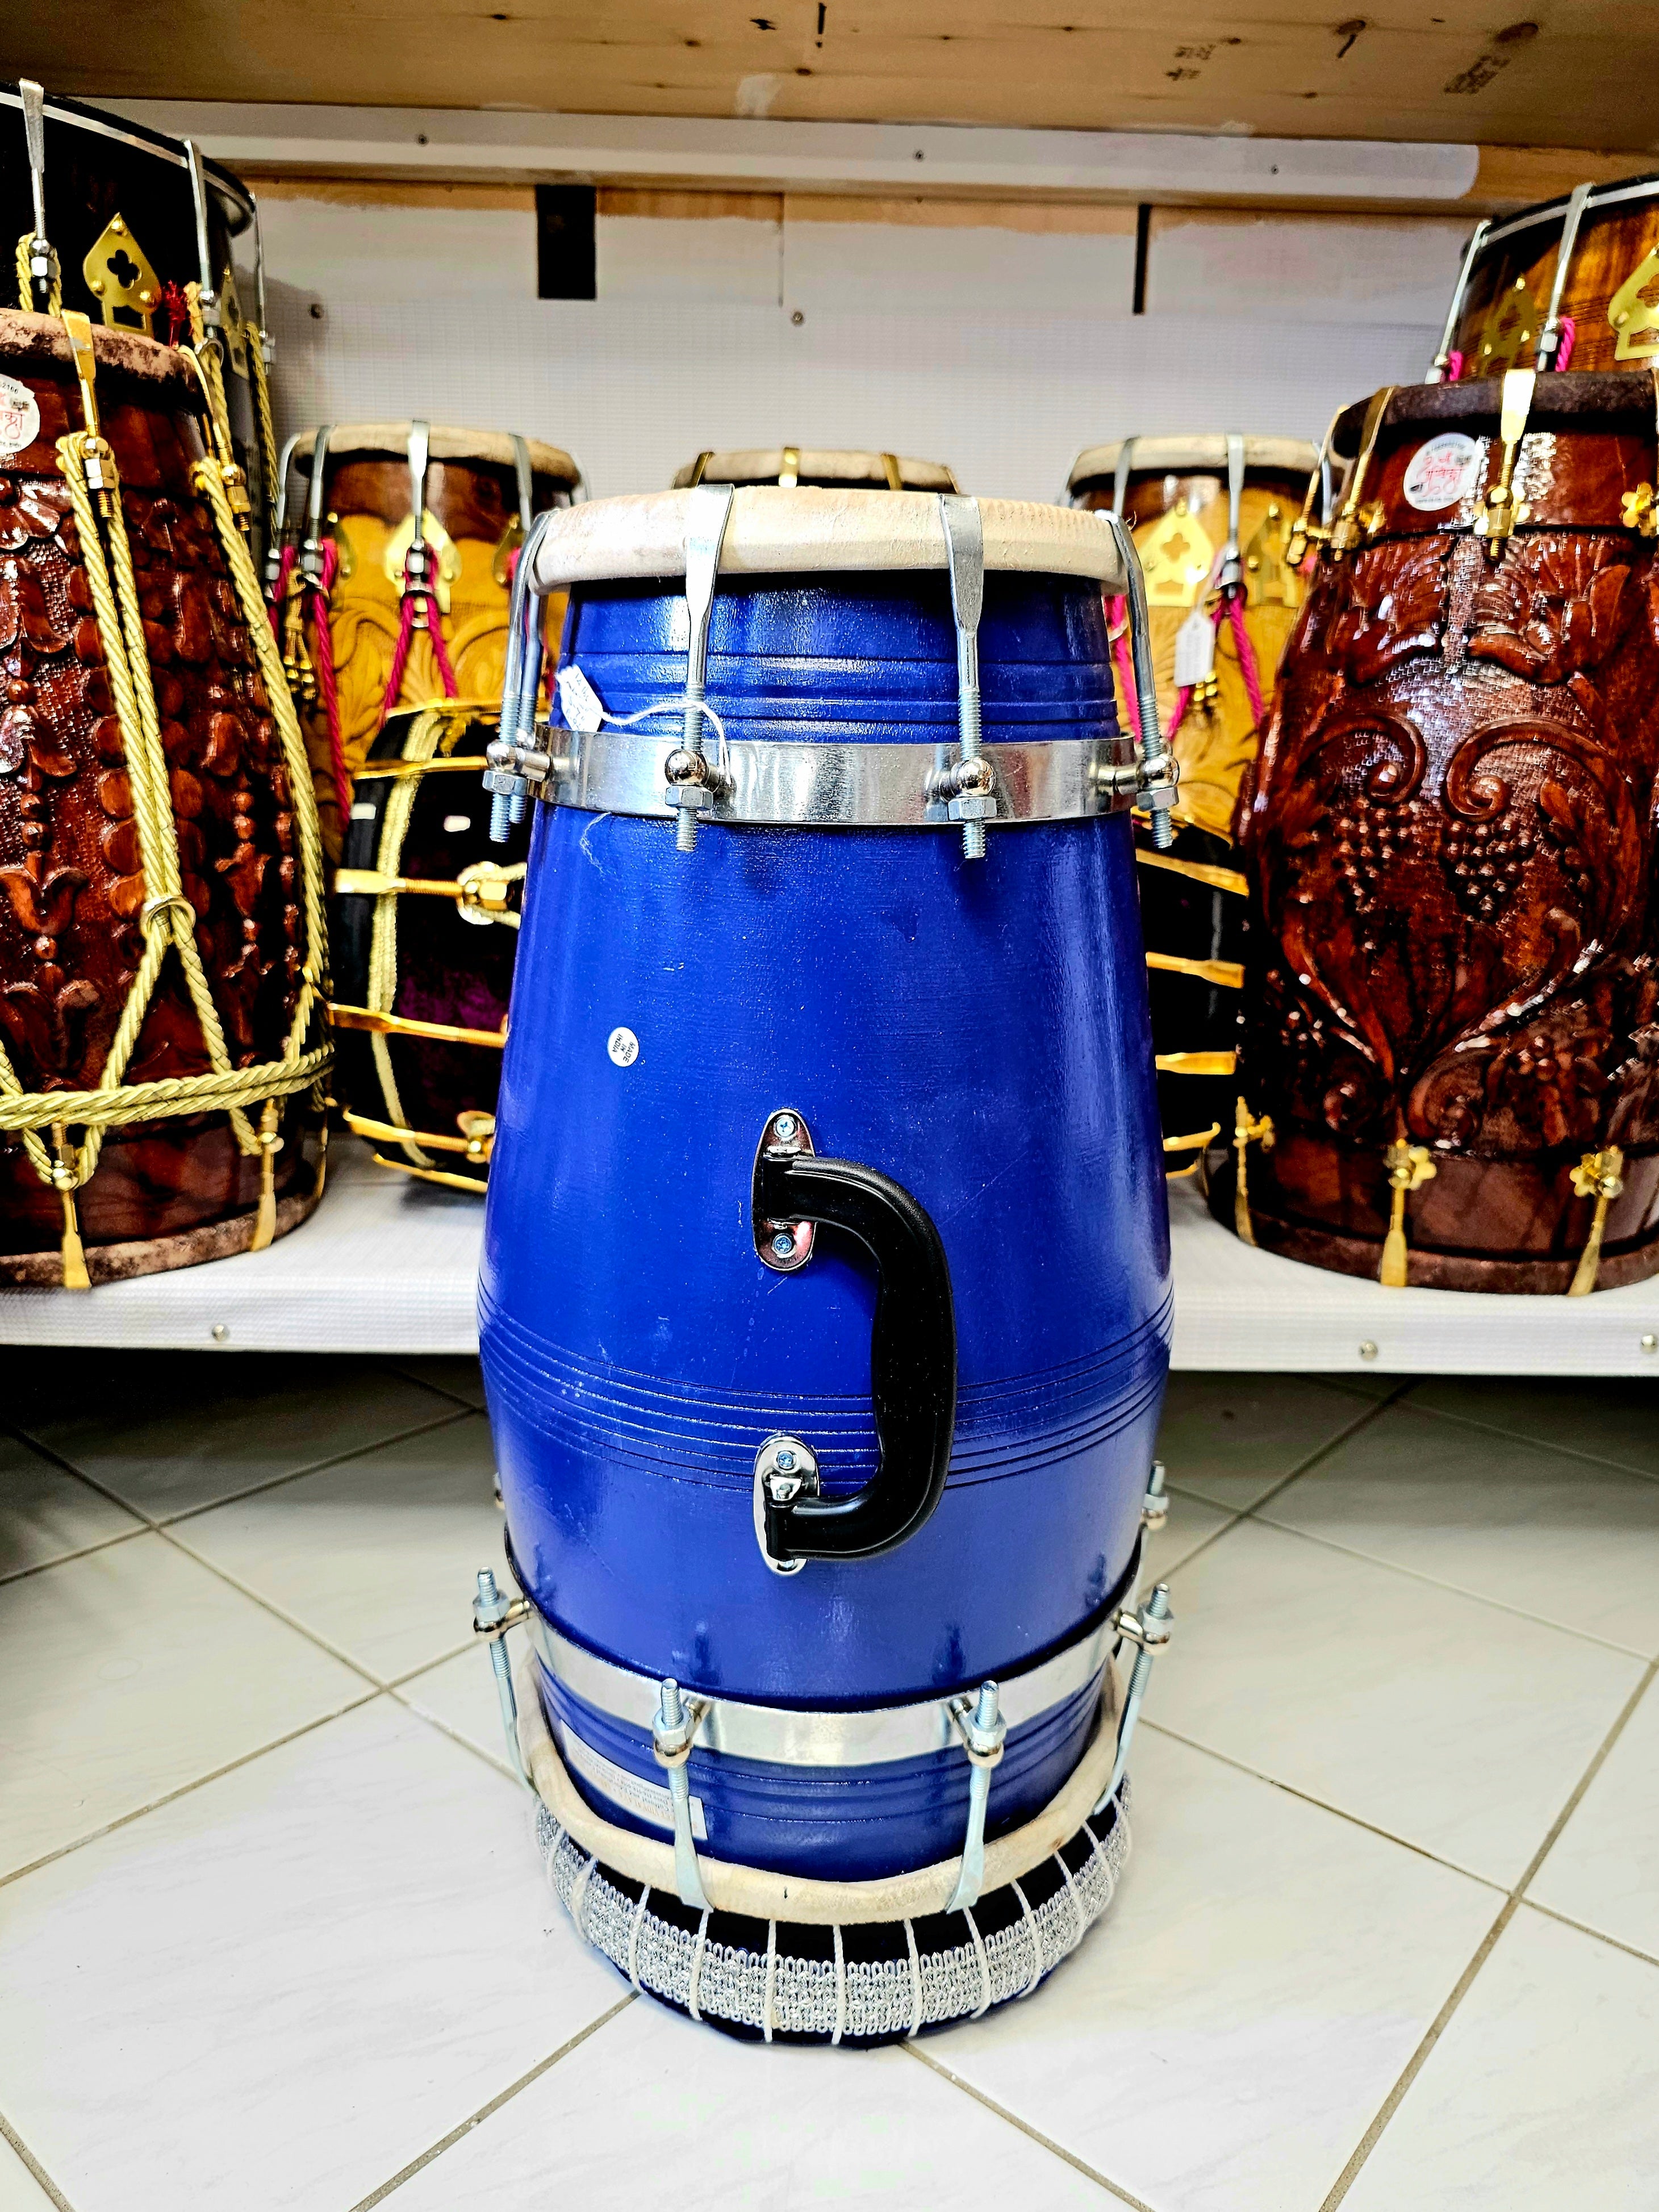 The Sapphire Symphony Dholak - A Professional Blue Mango Wood Dholak with Chrome Bolts, Metal Rings and a Handle!